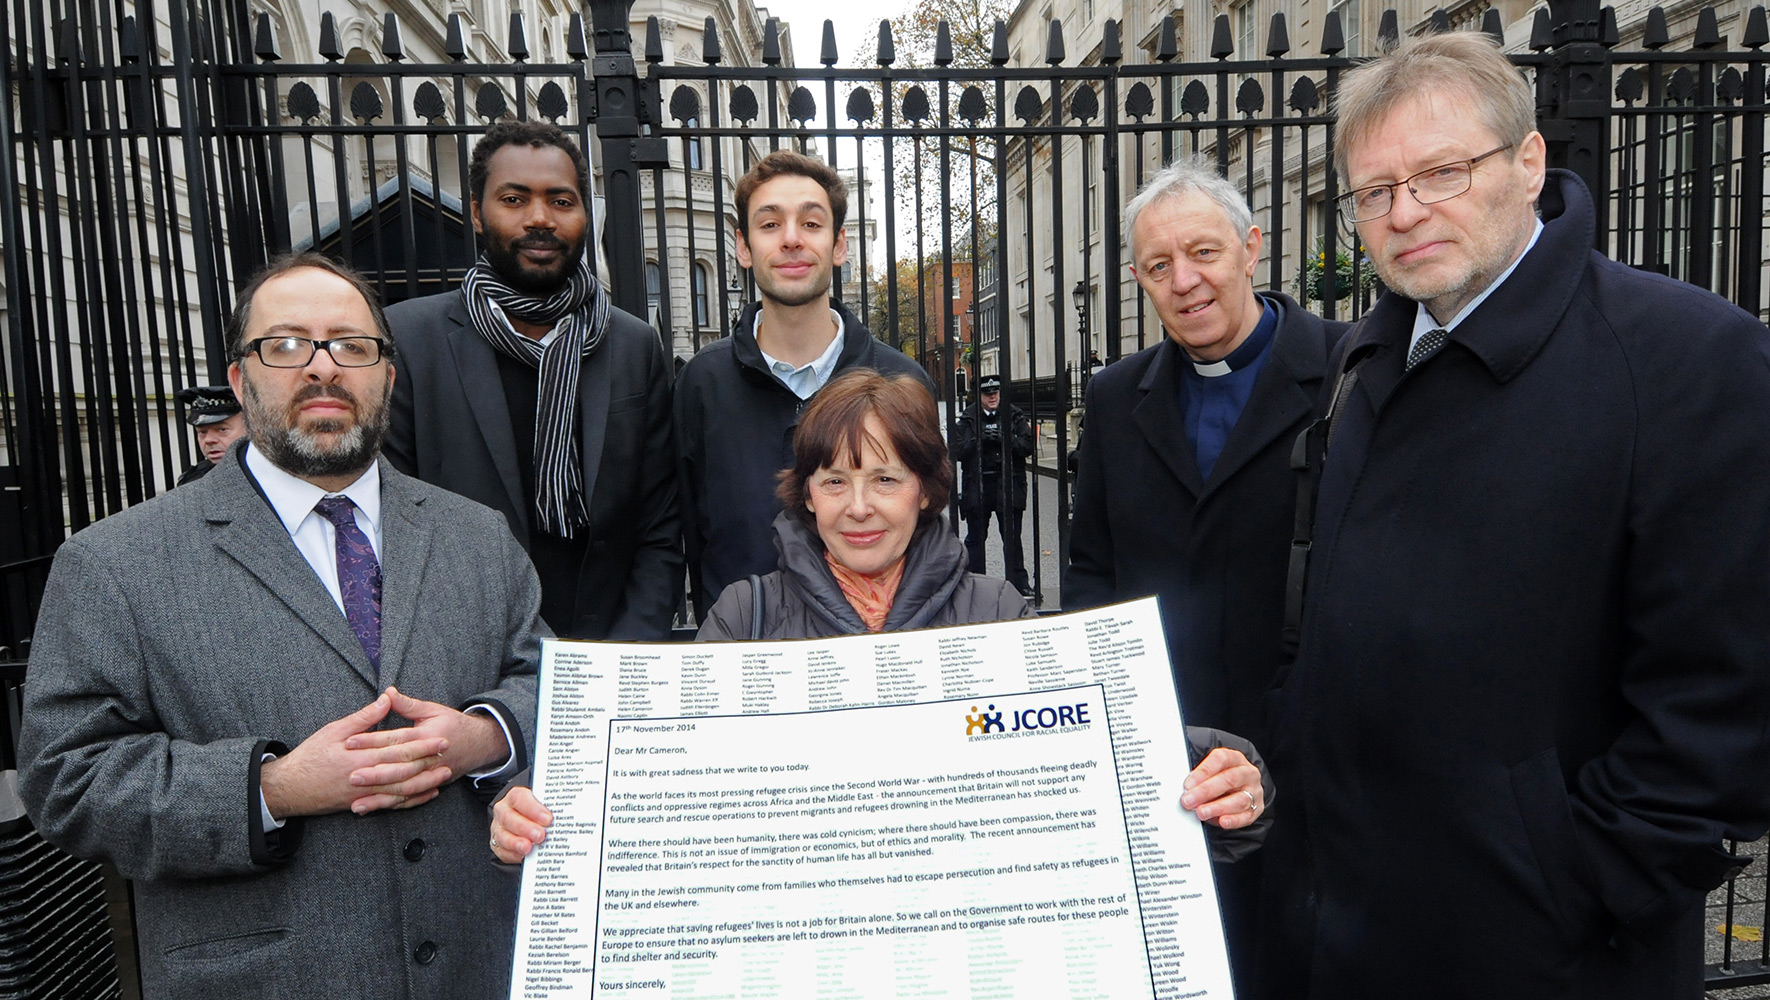 JCORE Honorary President Edie Friedman and a group of faith leaders stand outside Downing Street in 2014. They are holding a petition addressed to David Cameron which calls for the government to open more safe routes for refugees.